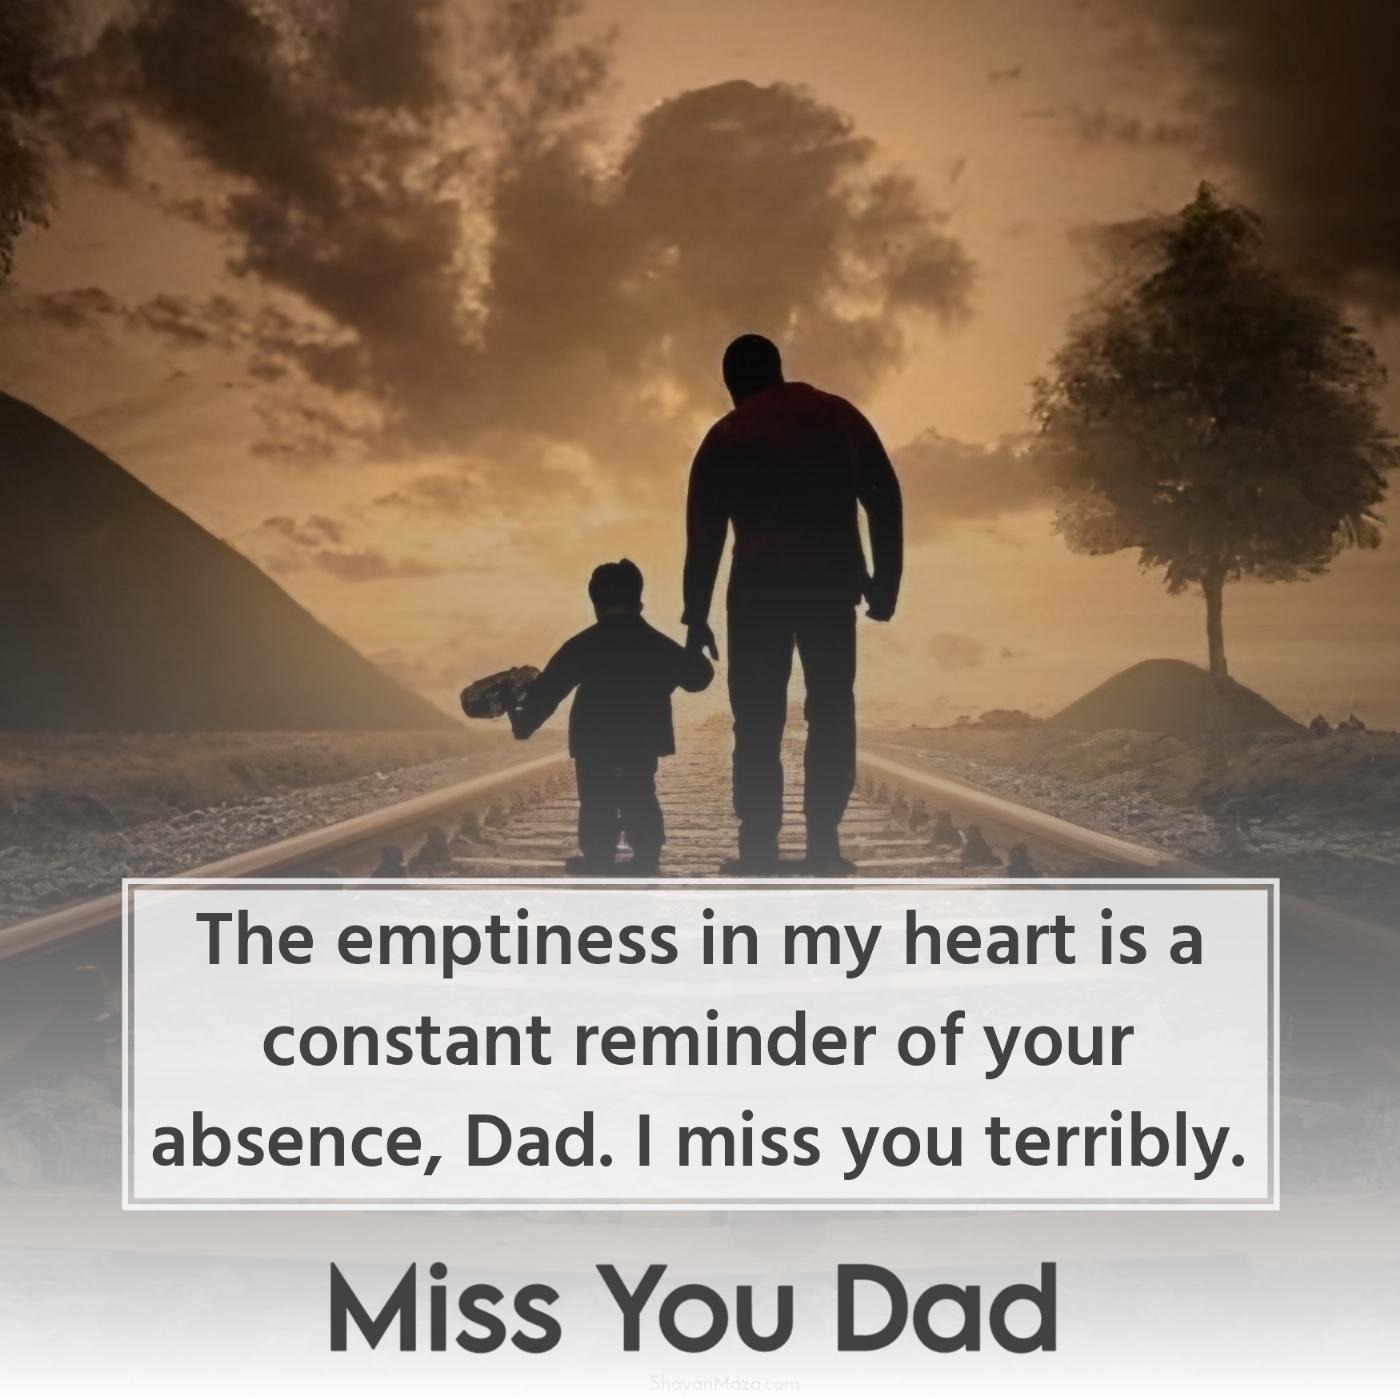 The emptiness in my heart is a constant reminder of your absence Dad